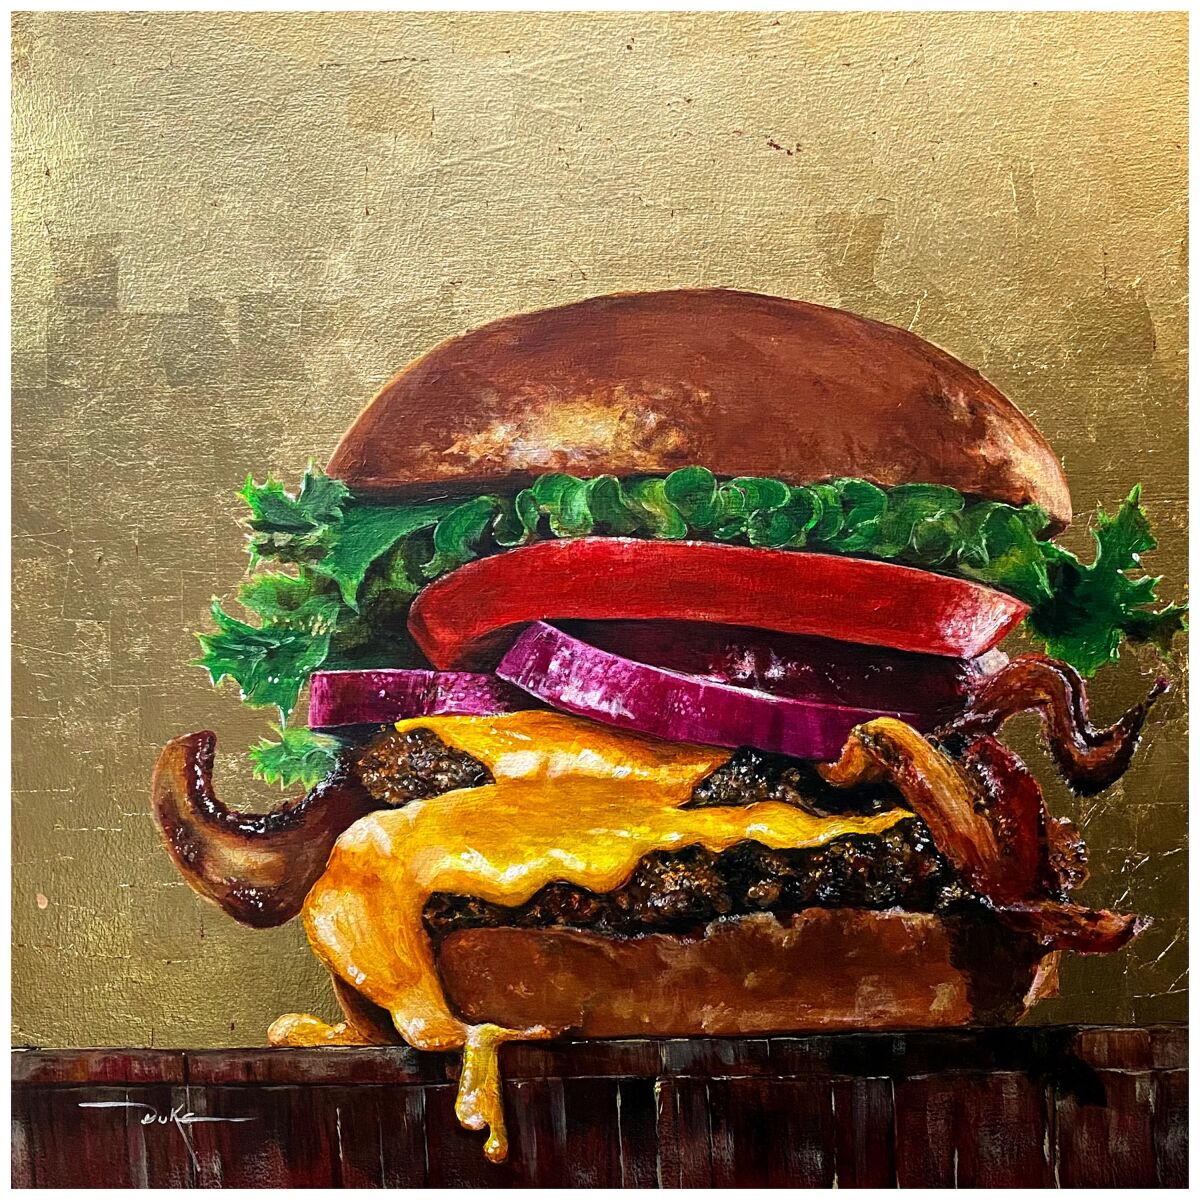 A painting of a cheeseburger